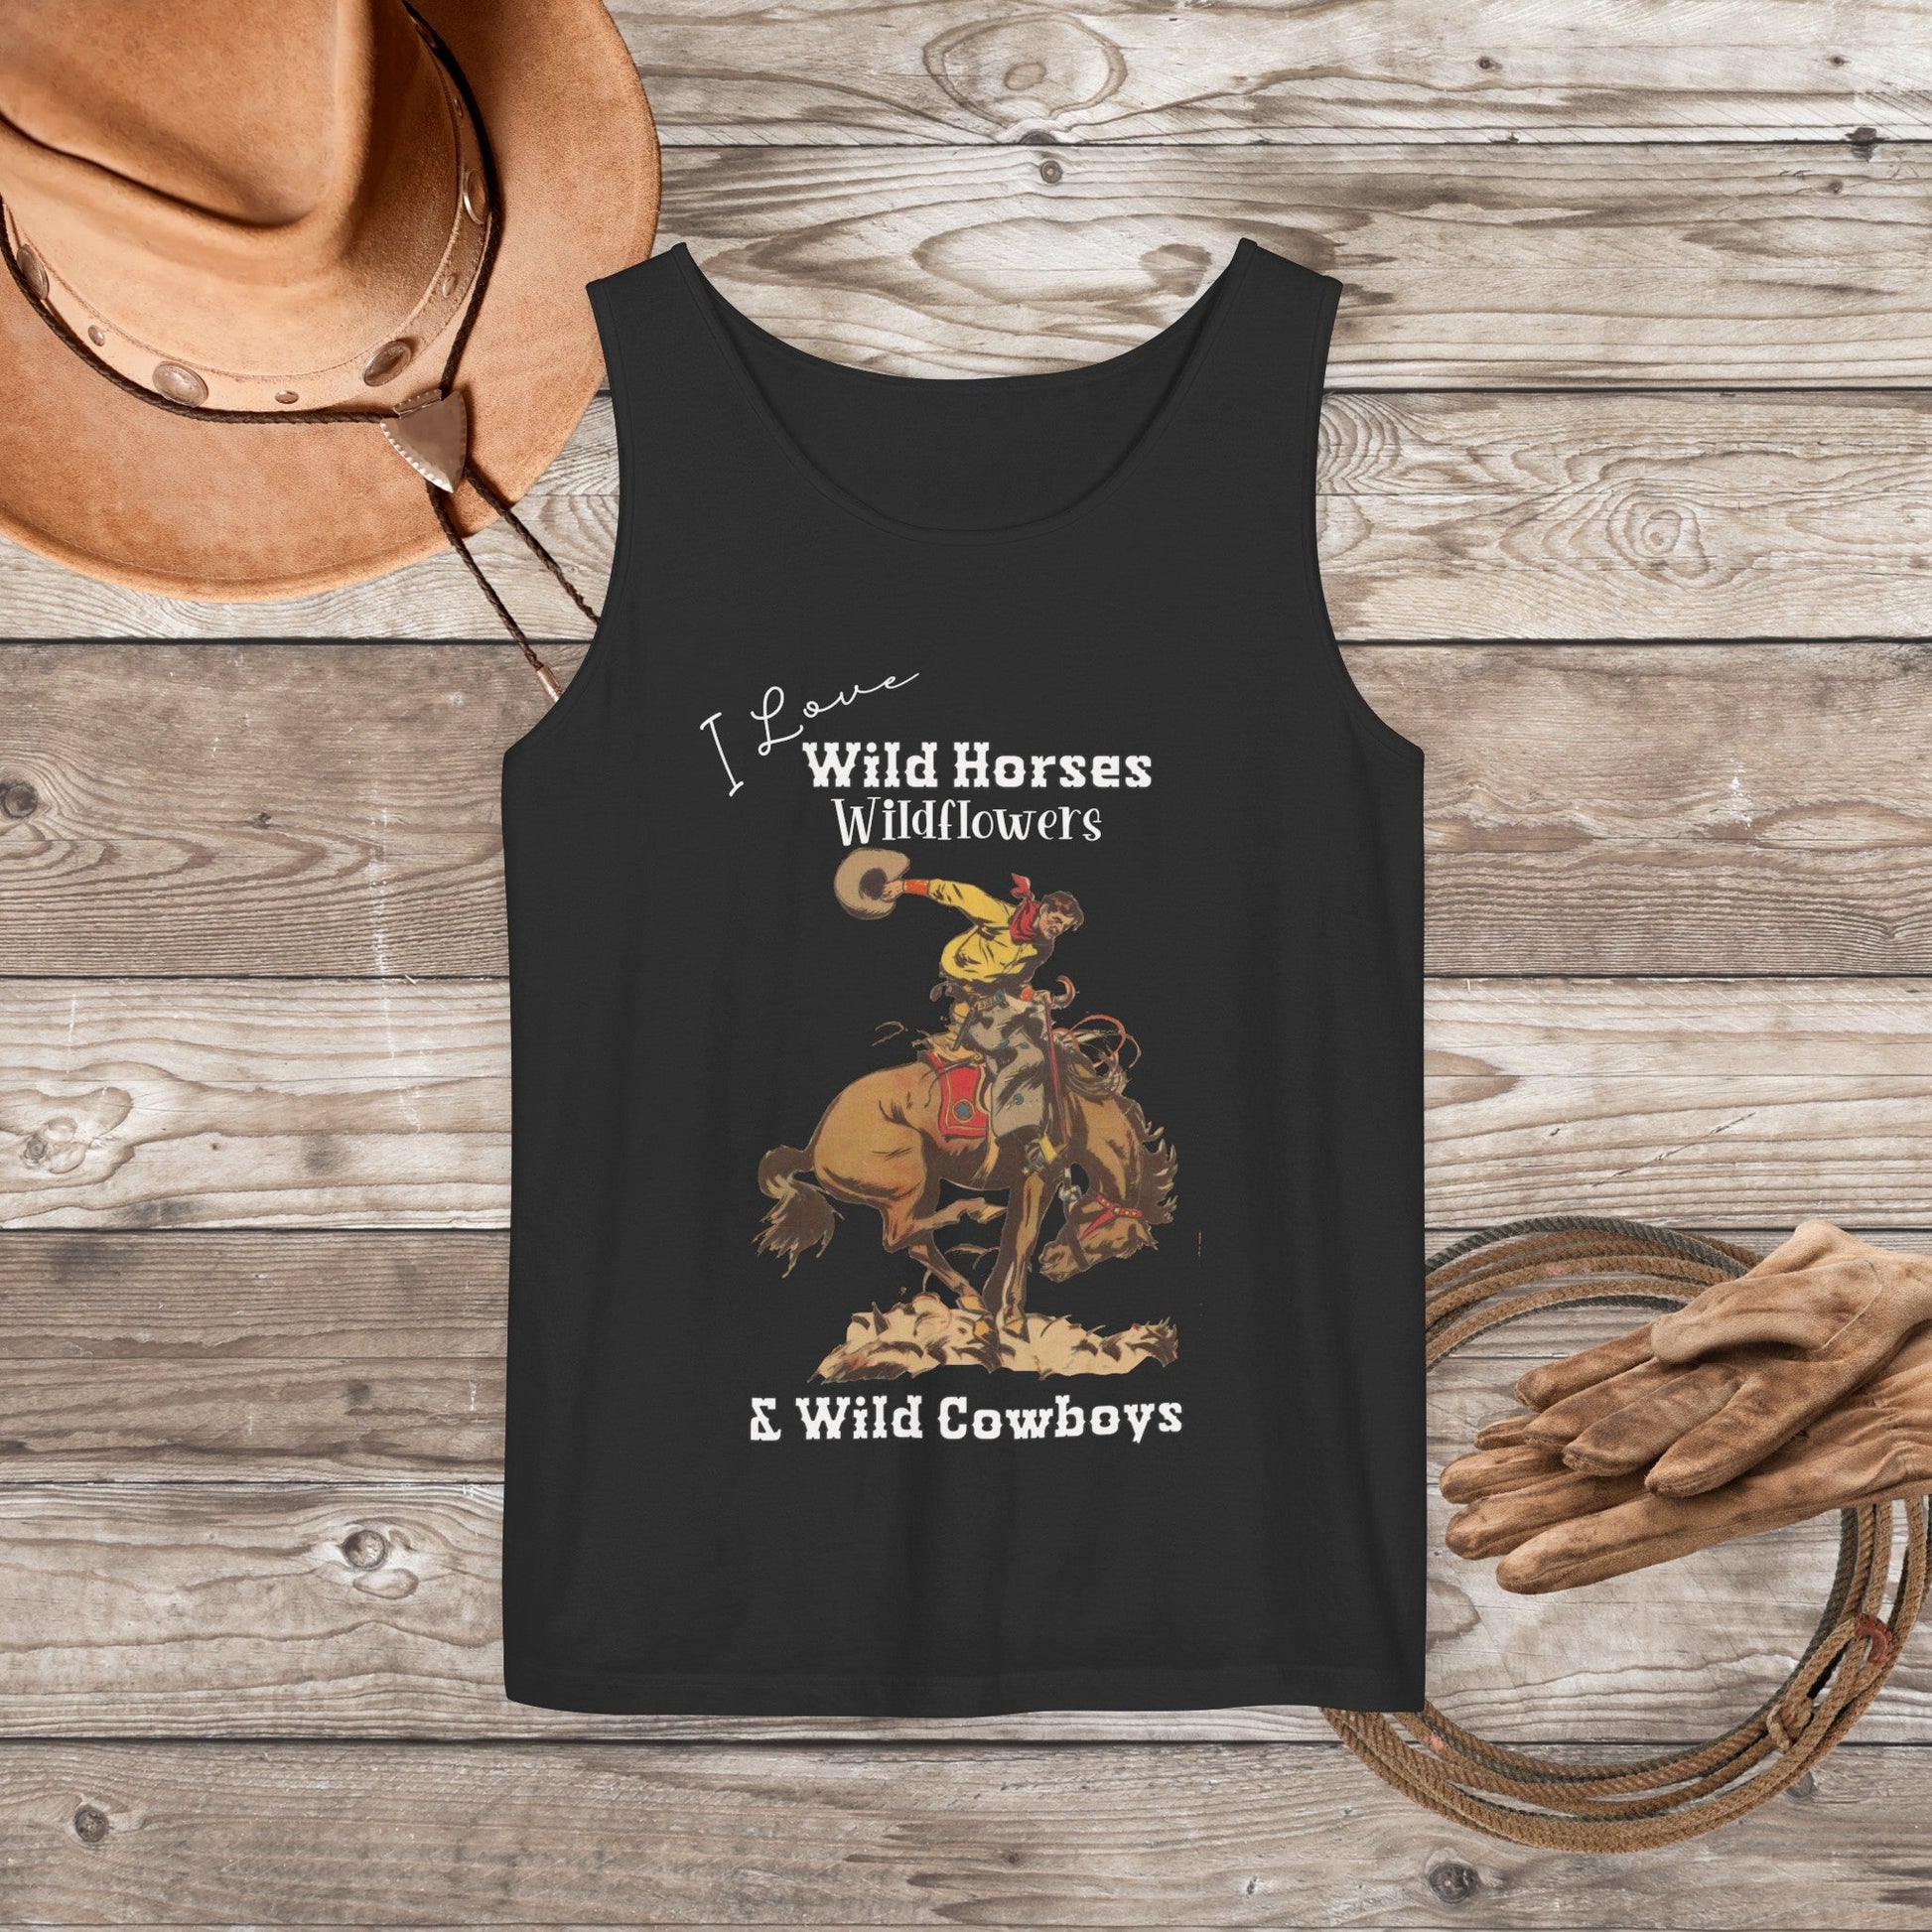 Cowgirl Comfort Colors Tank Top, Vintage Western Shirt, Retro Rodeo Shirt, Soft Loose Fit Graphic Cowboy Tee, Rodeo Bronc Gift, Tank Top - FlooredByArt